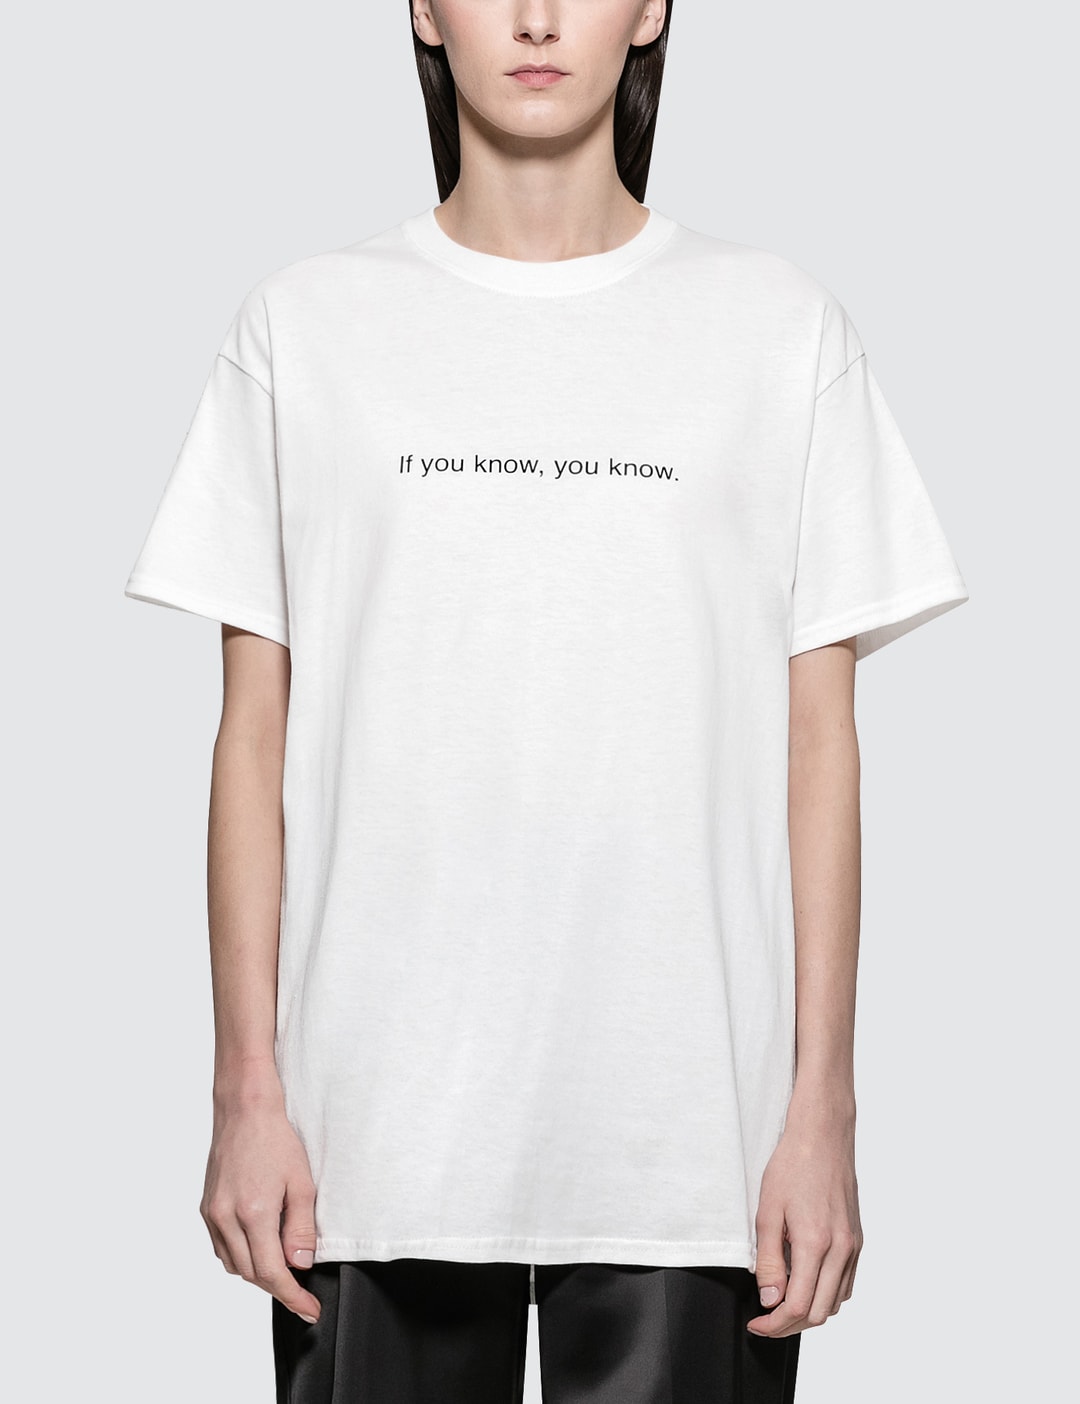 Fuck Art, Make Tees - If You Know, You Know. Short Sleeve T-shirt | HBX ...